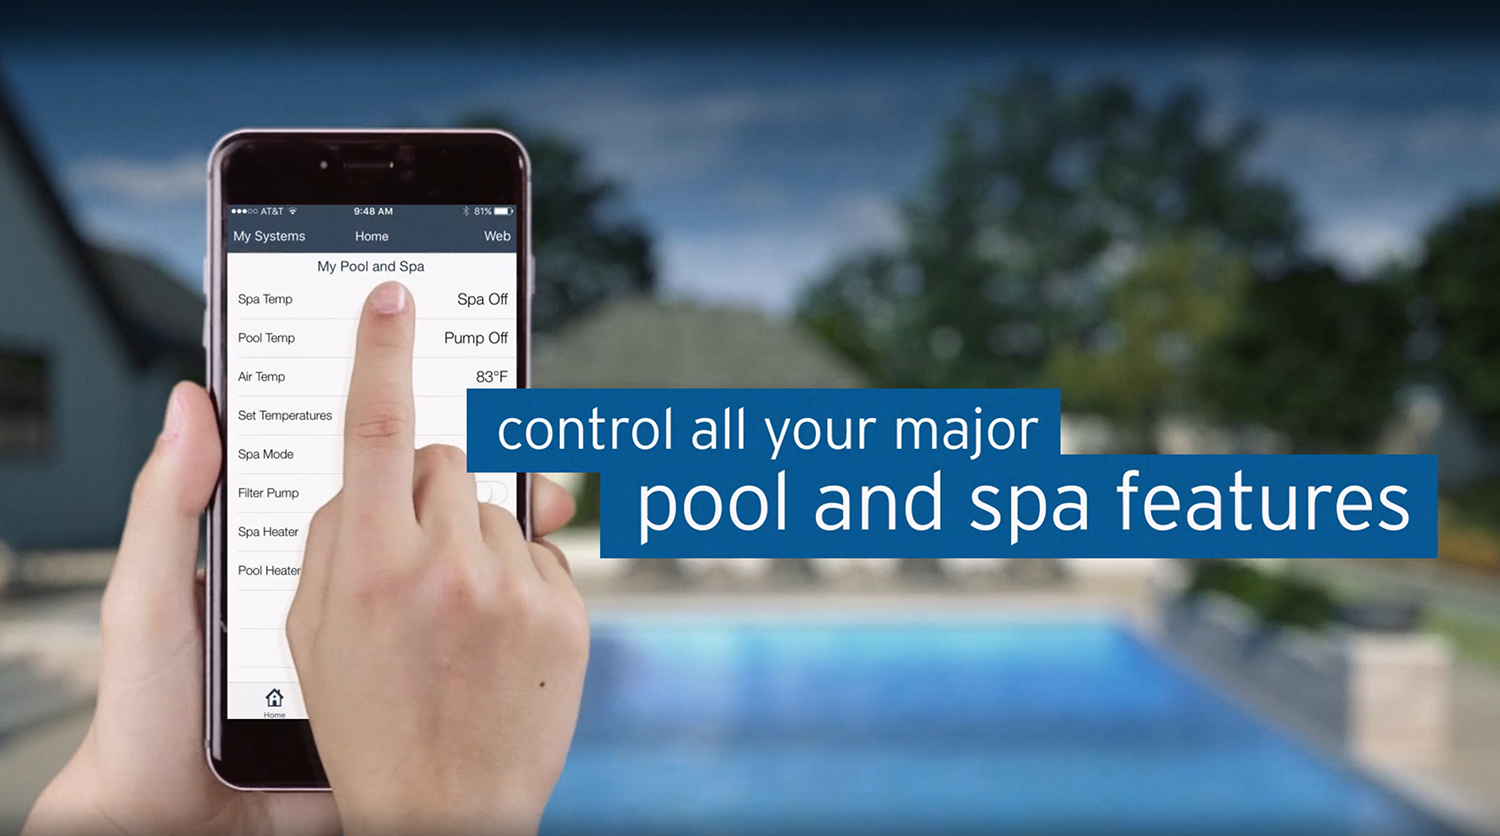 The iAquaLink Pool Control App lets you control your pool anytime, from anywhere